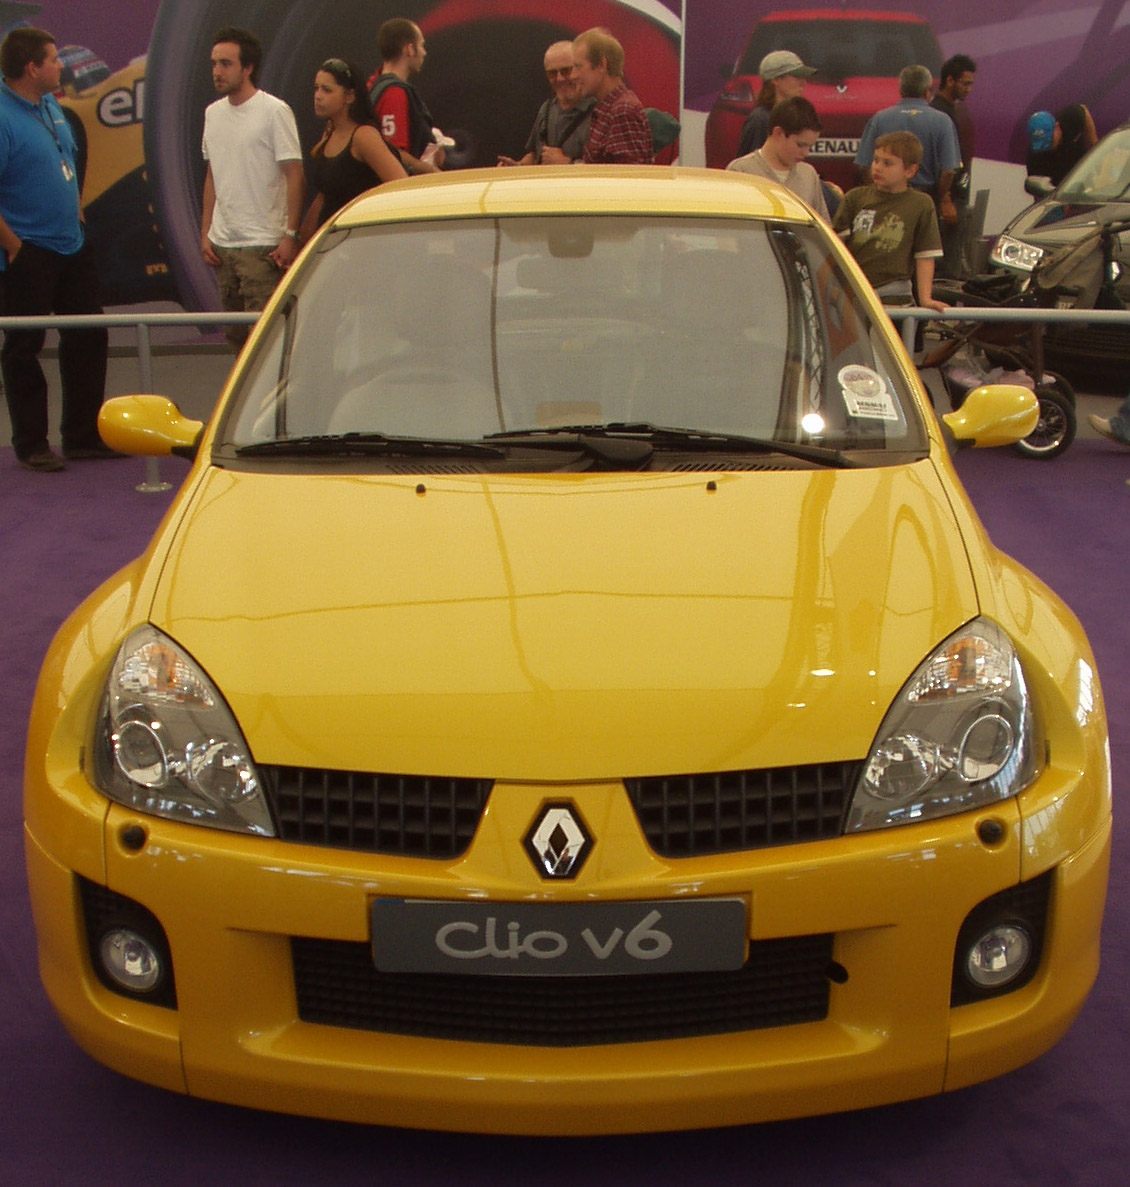 a yellow car parked on top of purple carpet next to a crowd